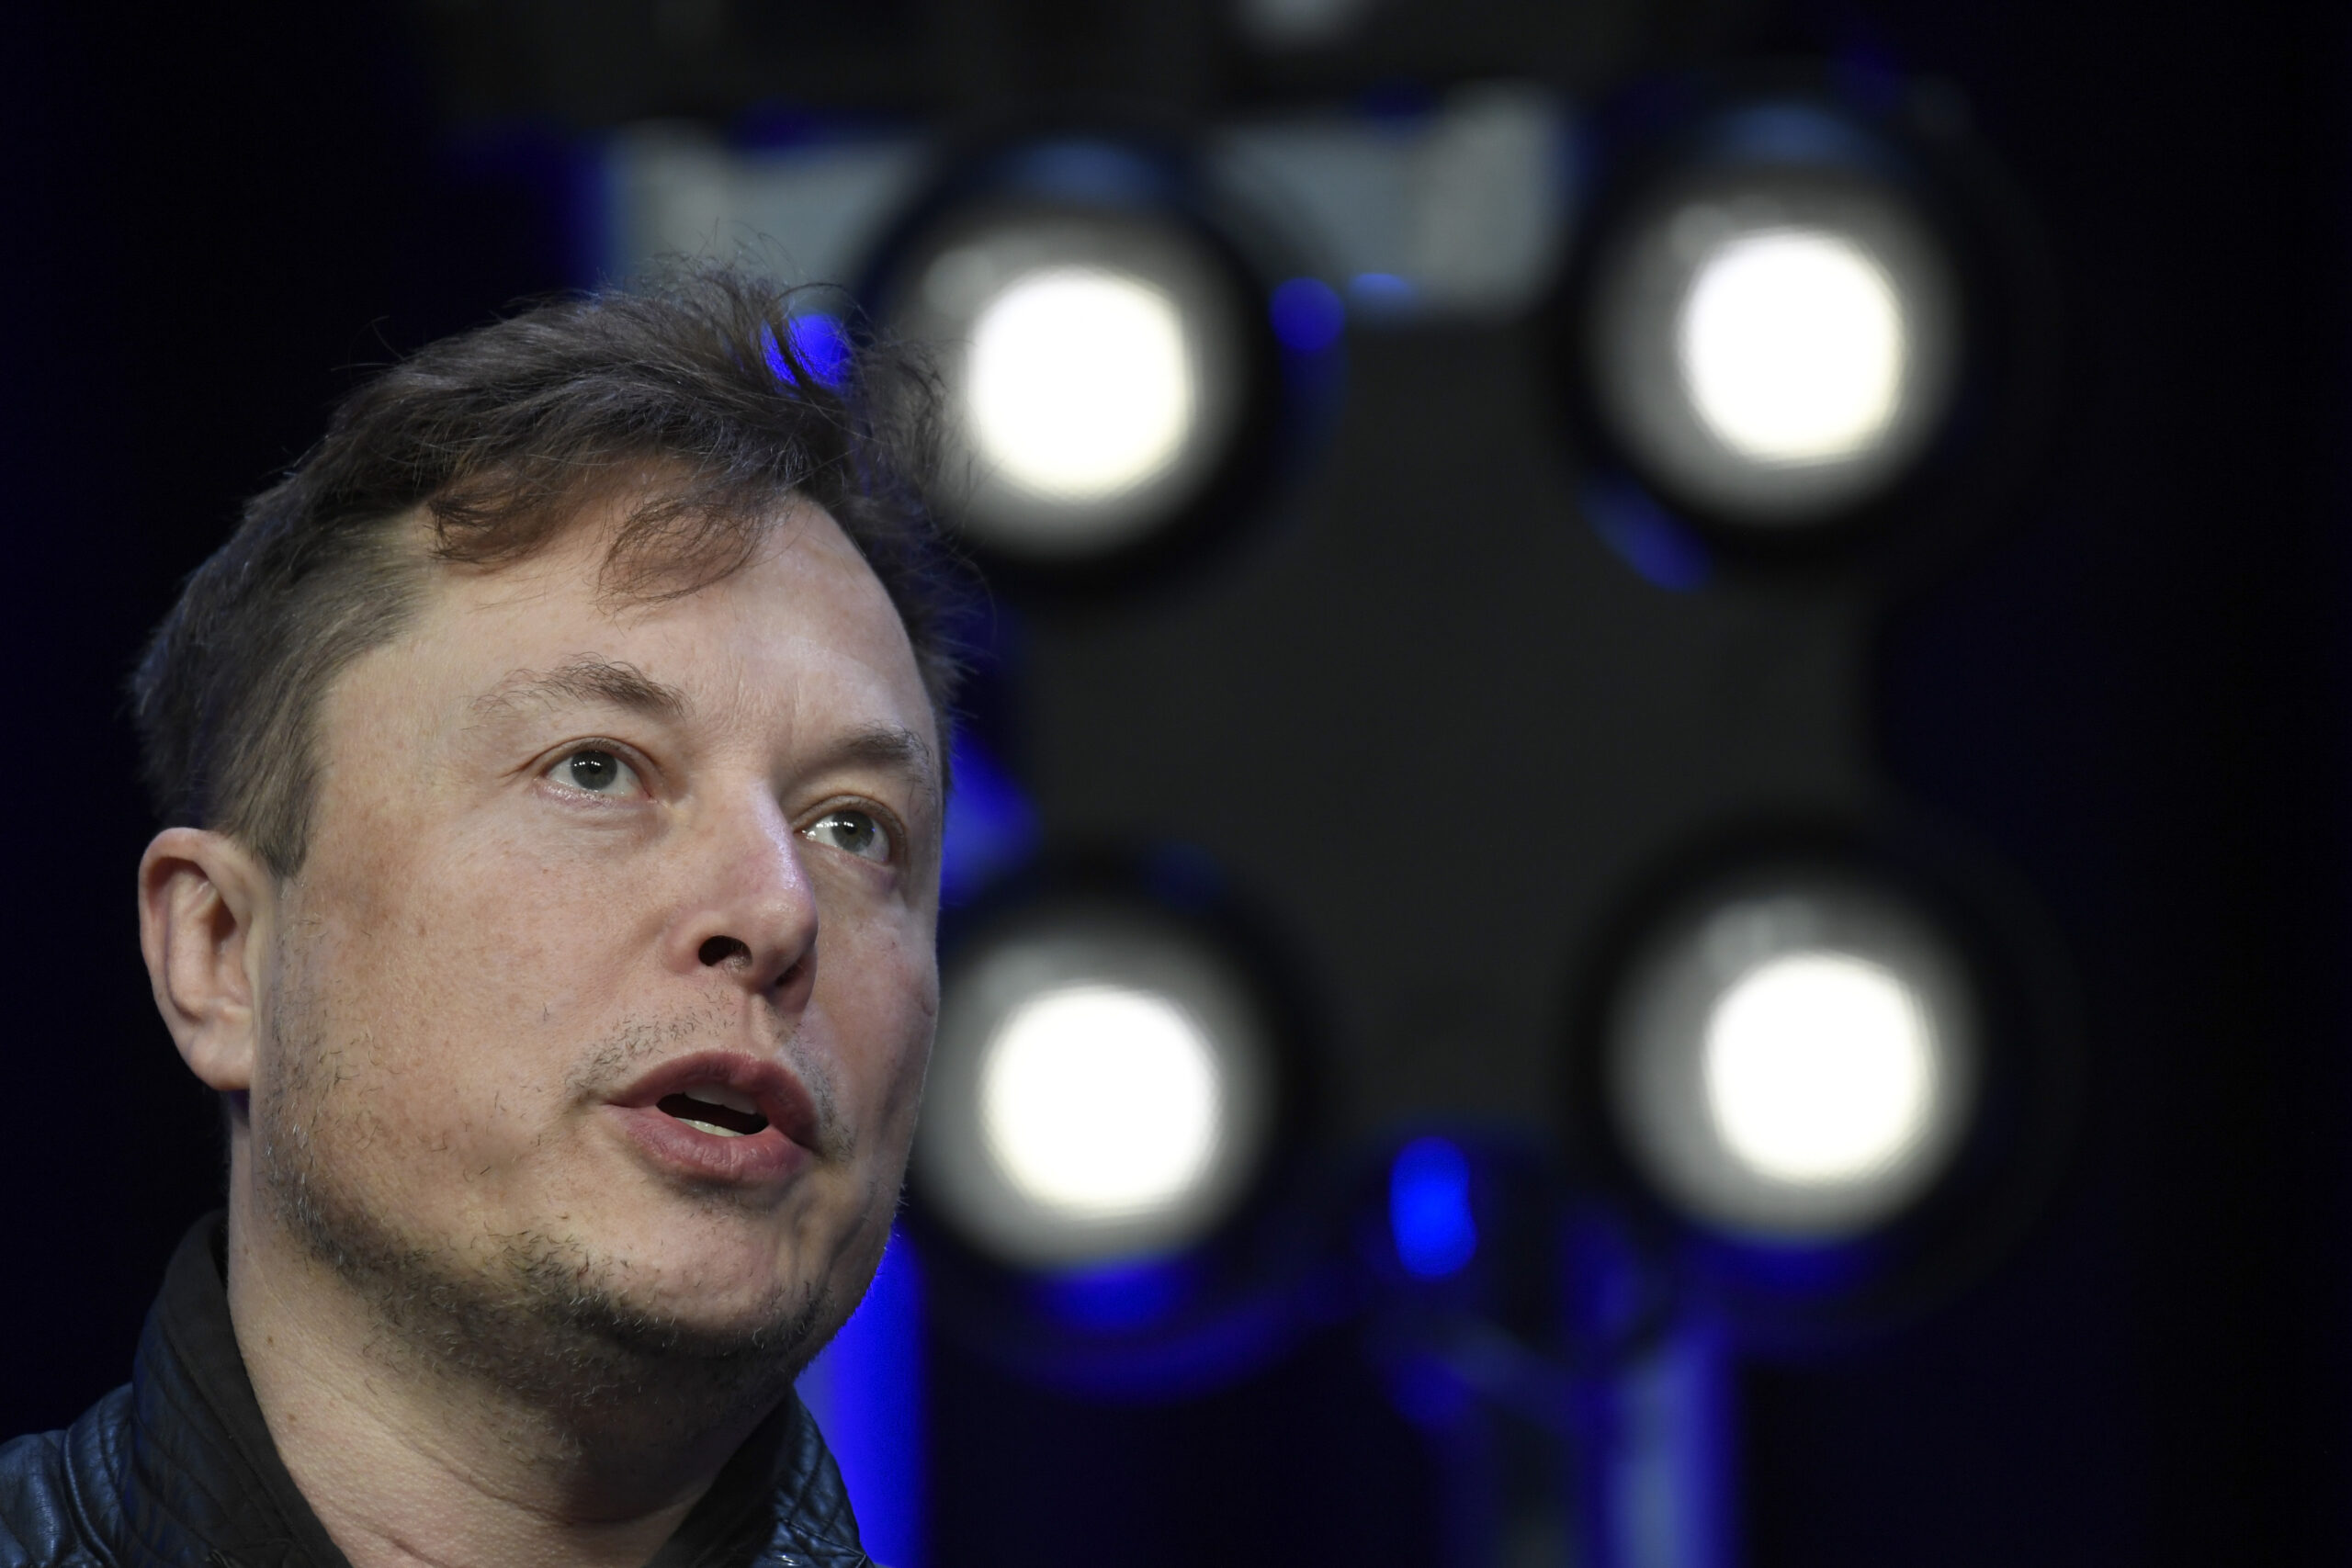 FILE - Elon Musk speaks at the SATELLITE Conference and Exhibition March 9, 2020, in Washington. On Tuesday, May 10, 2022. Musk has denied a claim of sexual misconduct by a Space X flight attendant who worked on his private jet in 2016. A report by Business Insider said SpaceX paid the woman $250,000 in severance in 2018 in exchange for her agreeing not to file a lawsuit over her claim. (AP Photo/Susan Walsh, File)